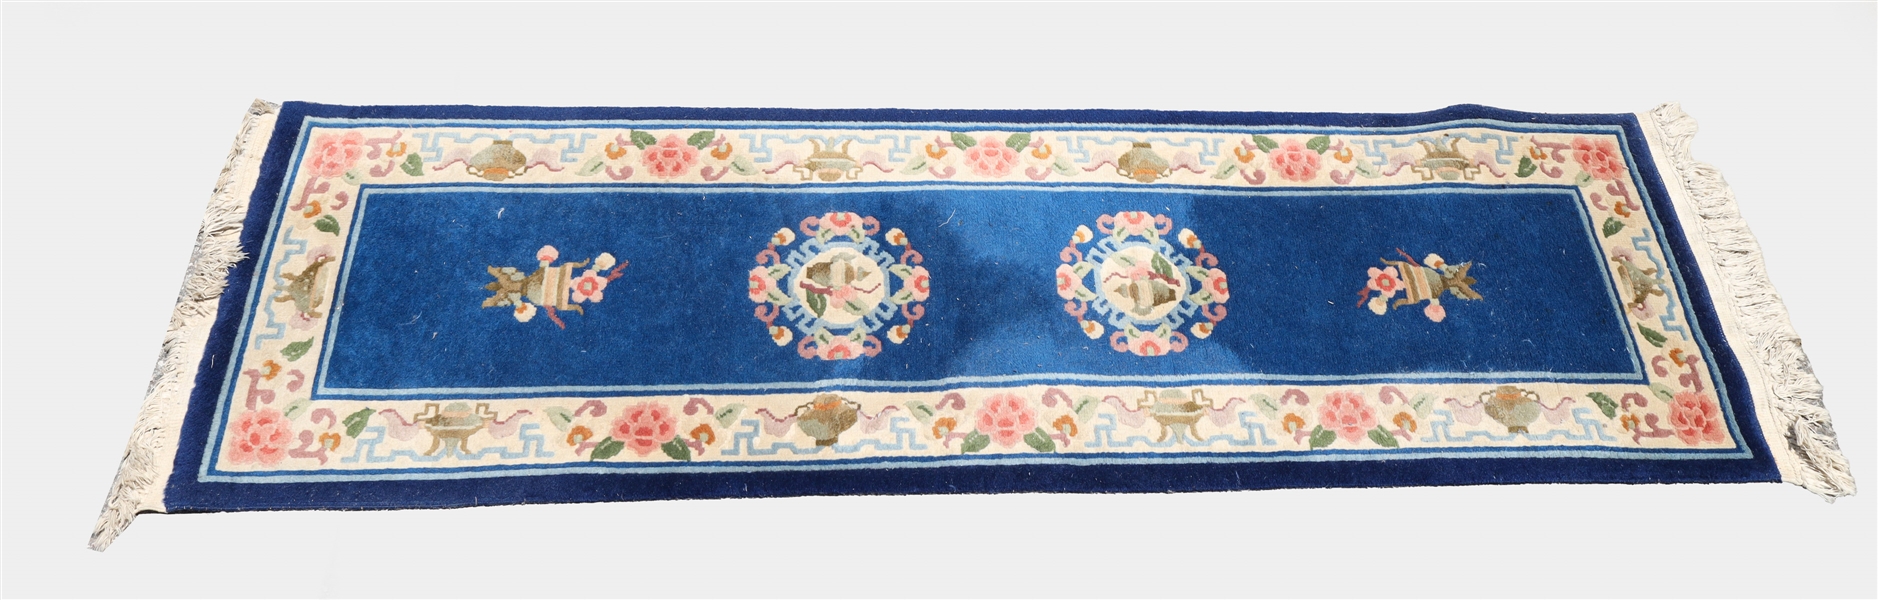 Vintage Chinese blue wool area